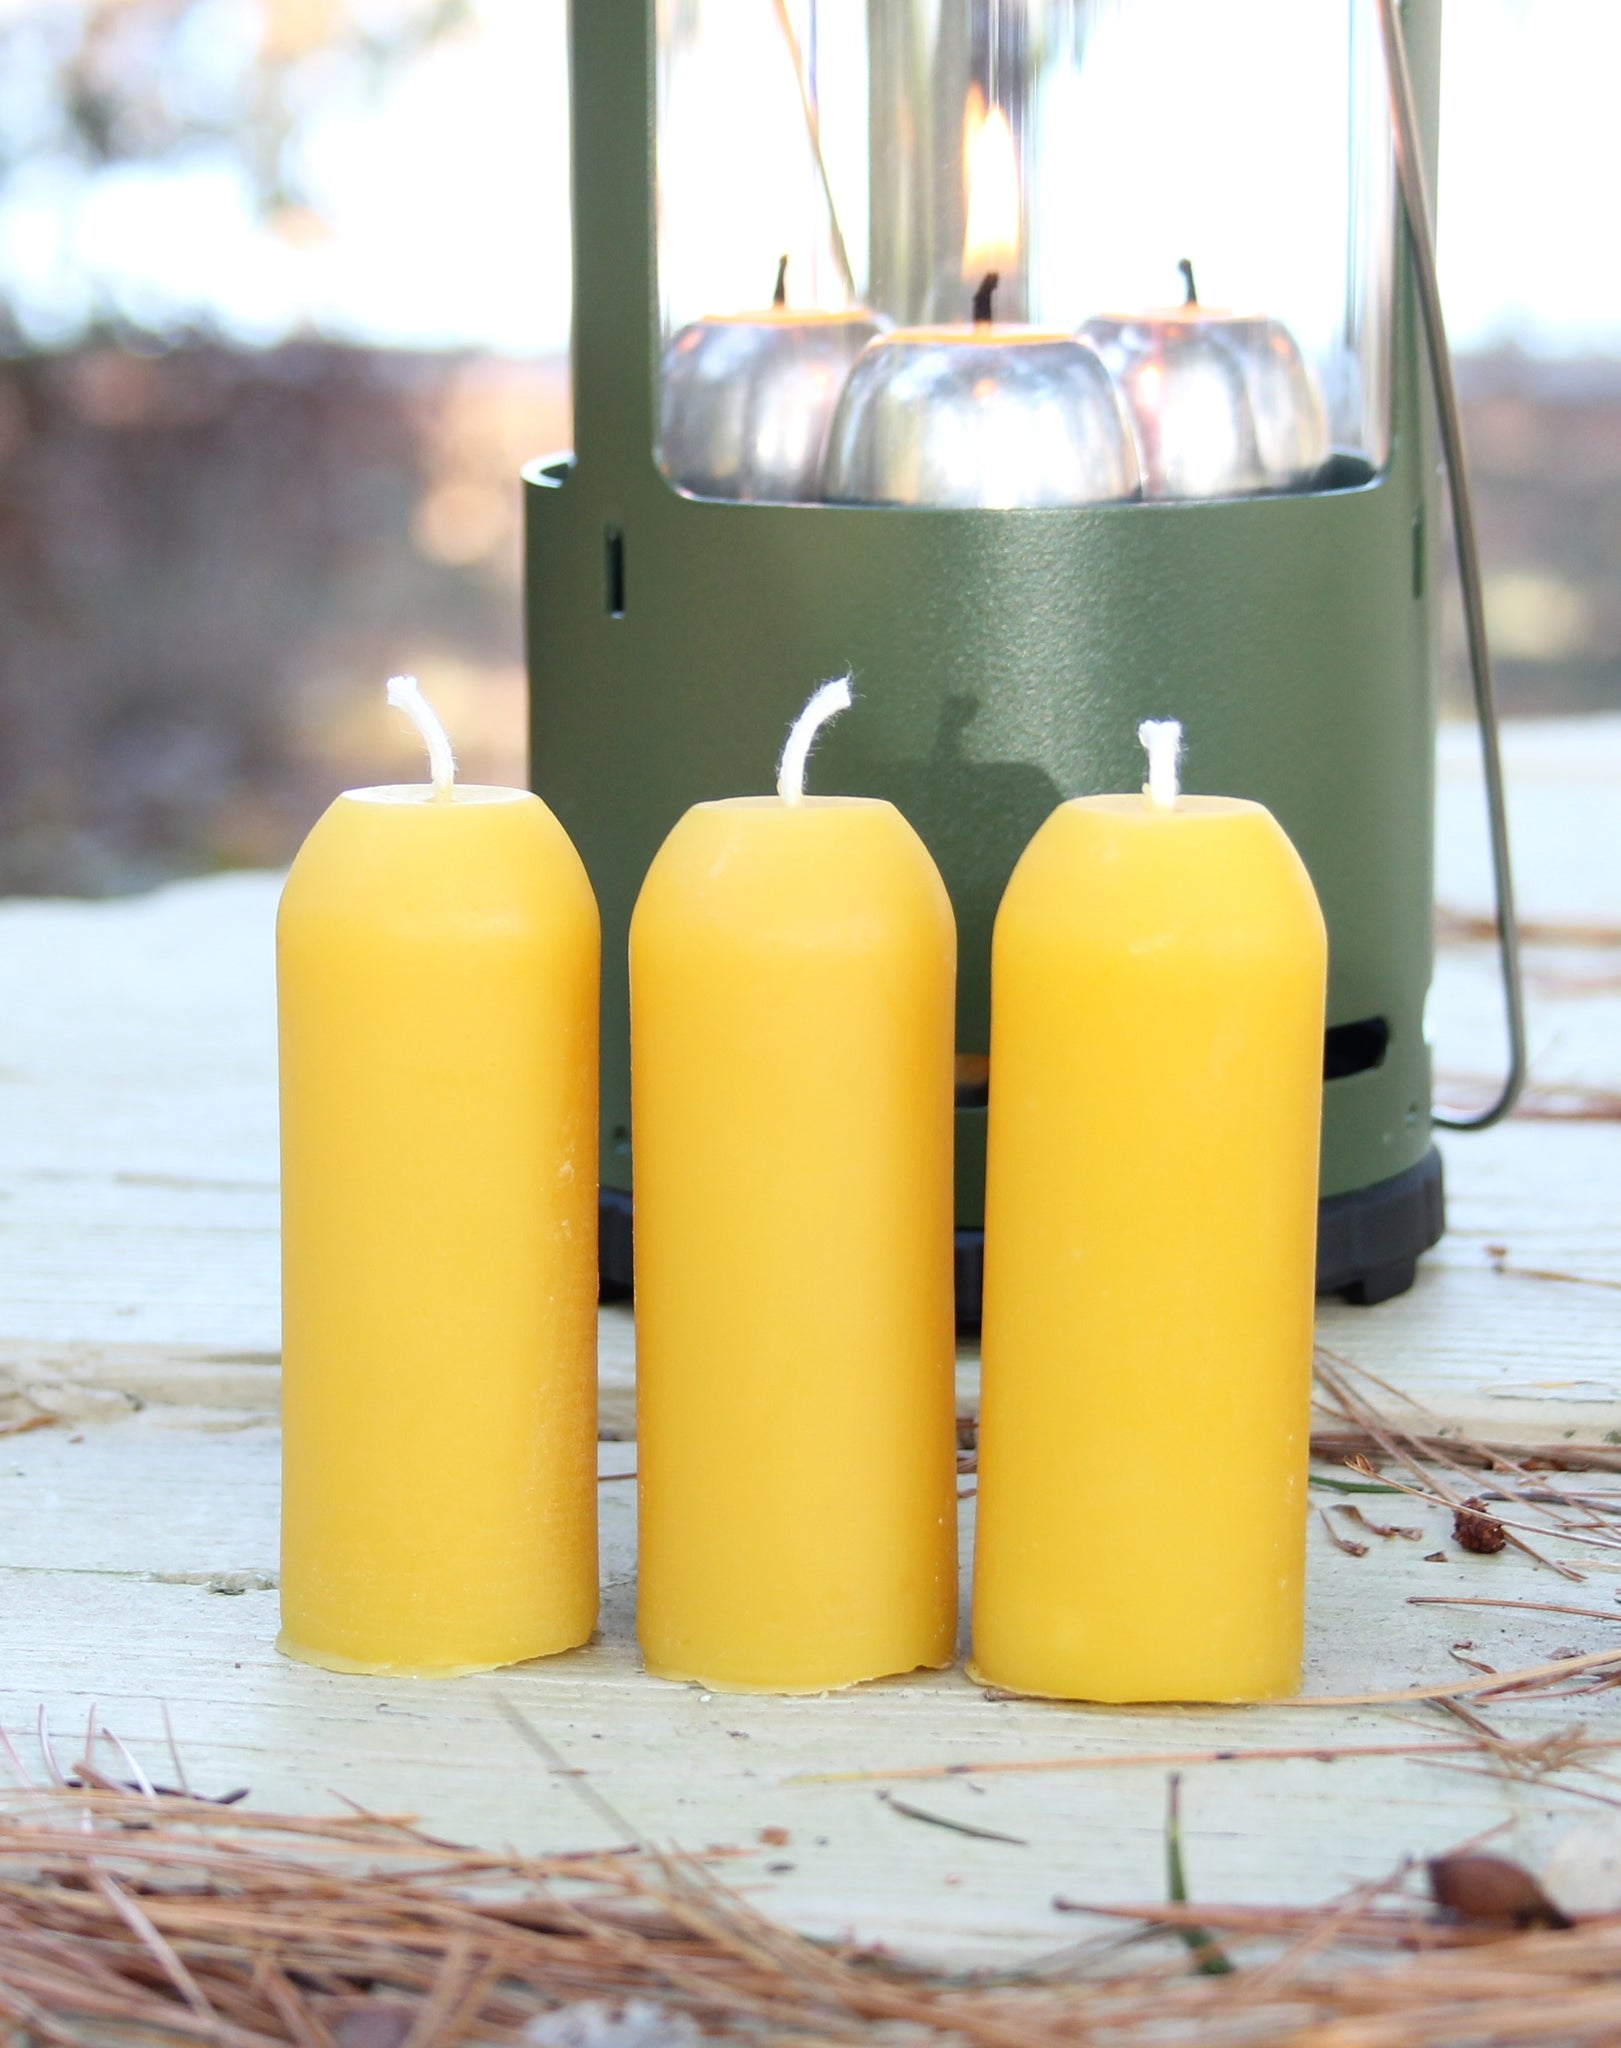 UCO 12-Hour Beeswax Candles, 5-Pack